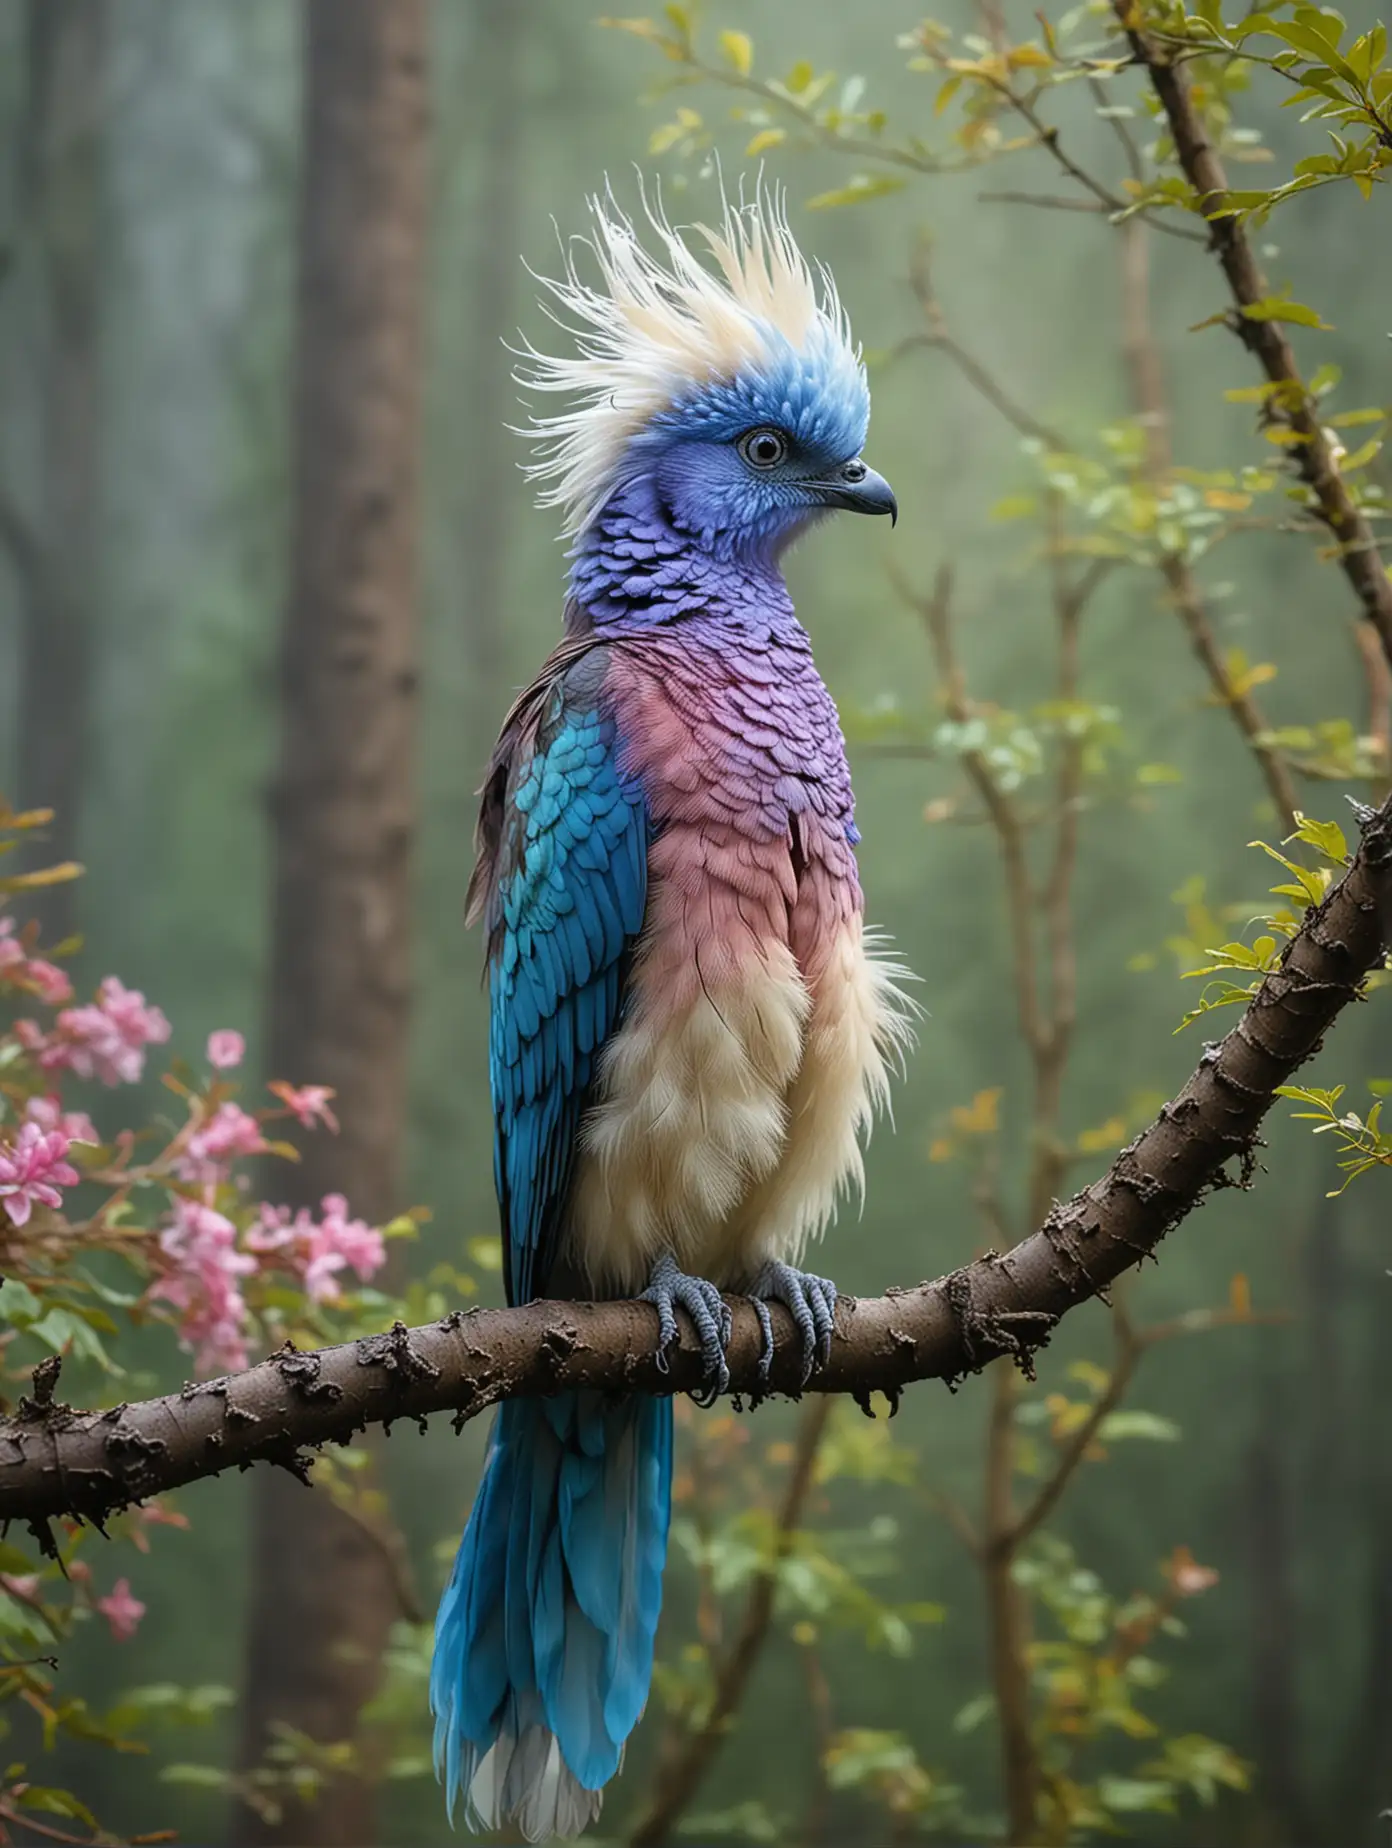 Colorful Crested Bird Relaxing in Morning Forest Fog